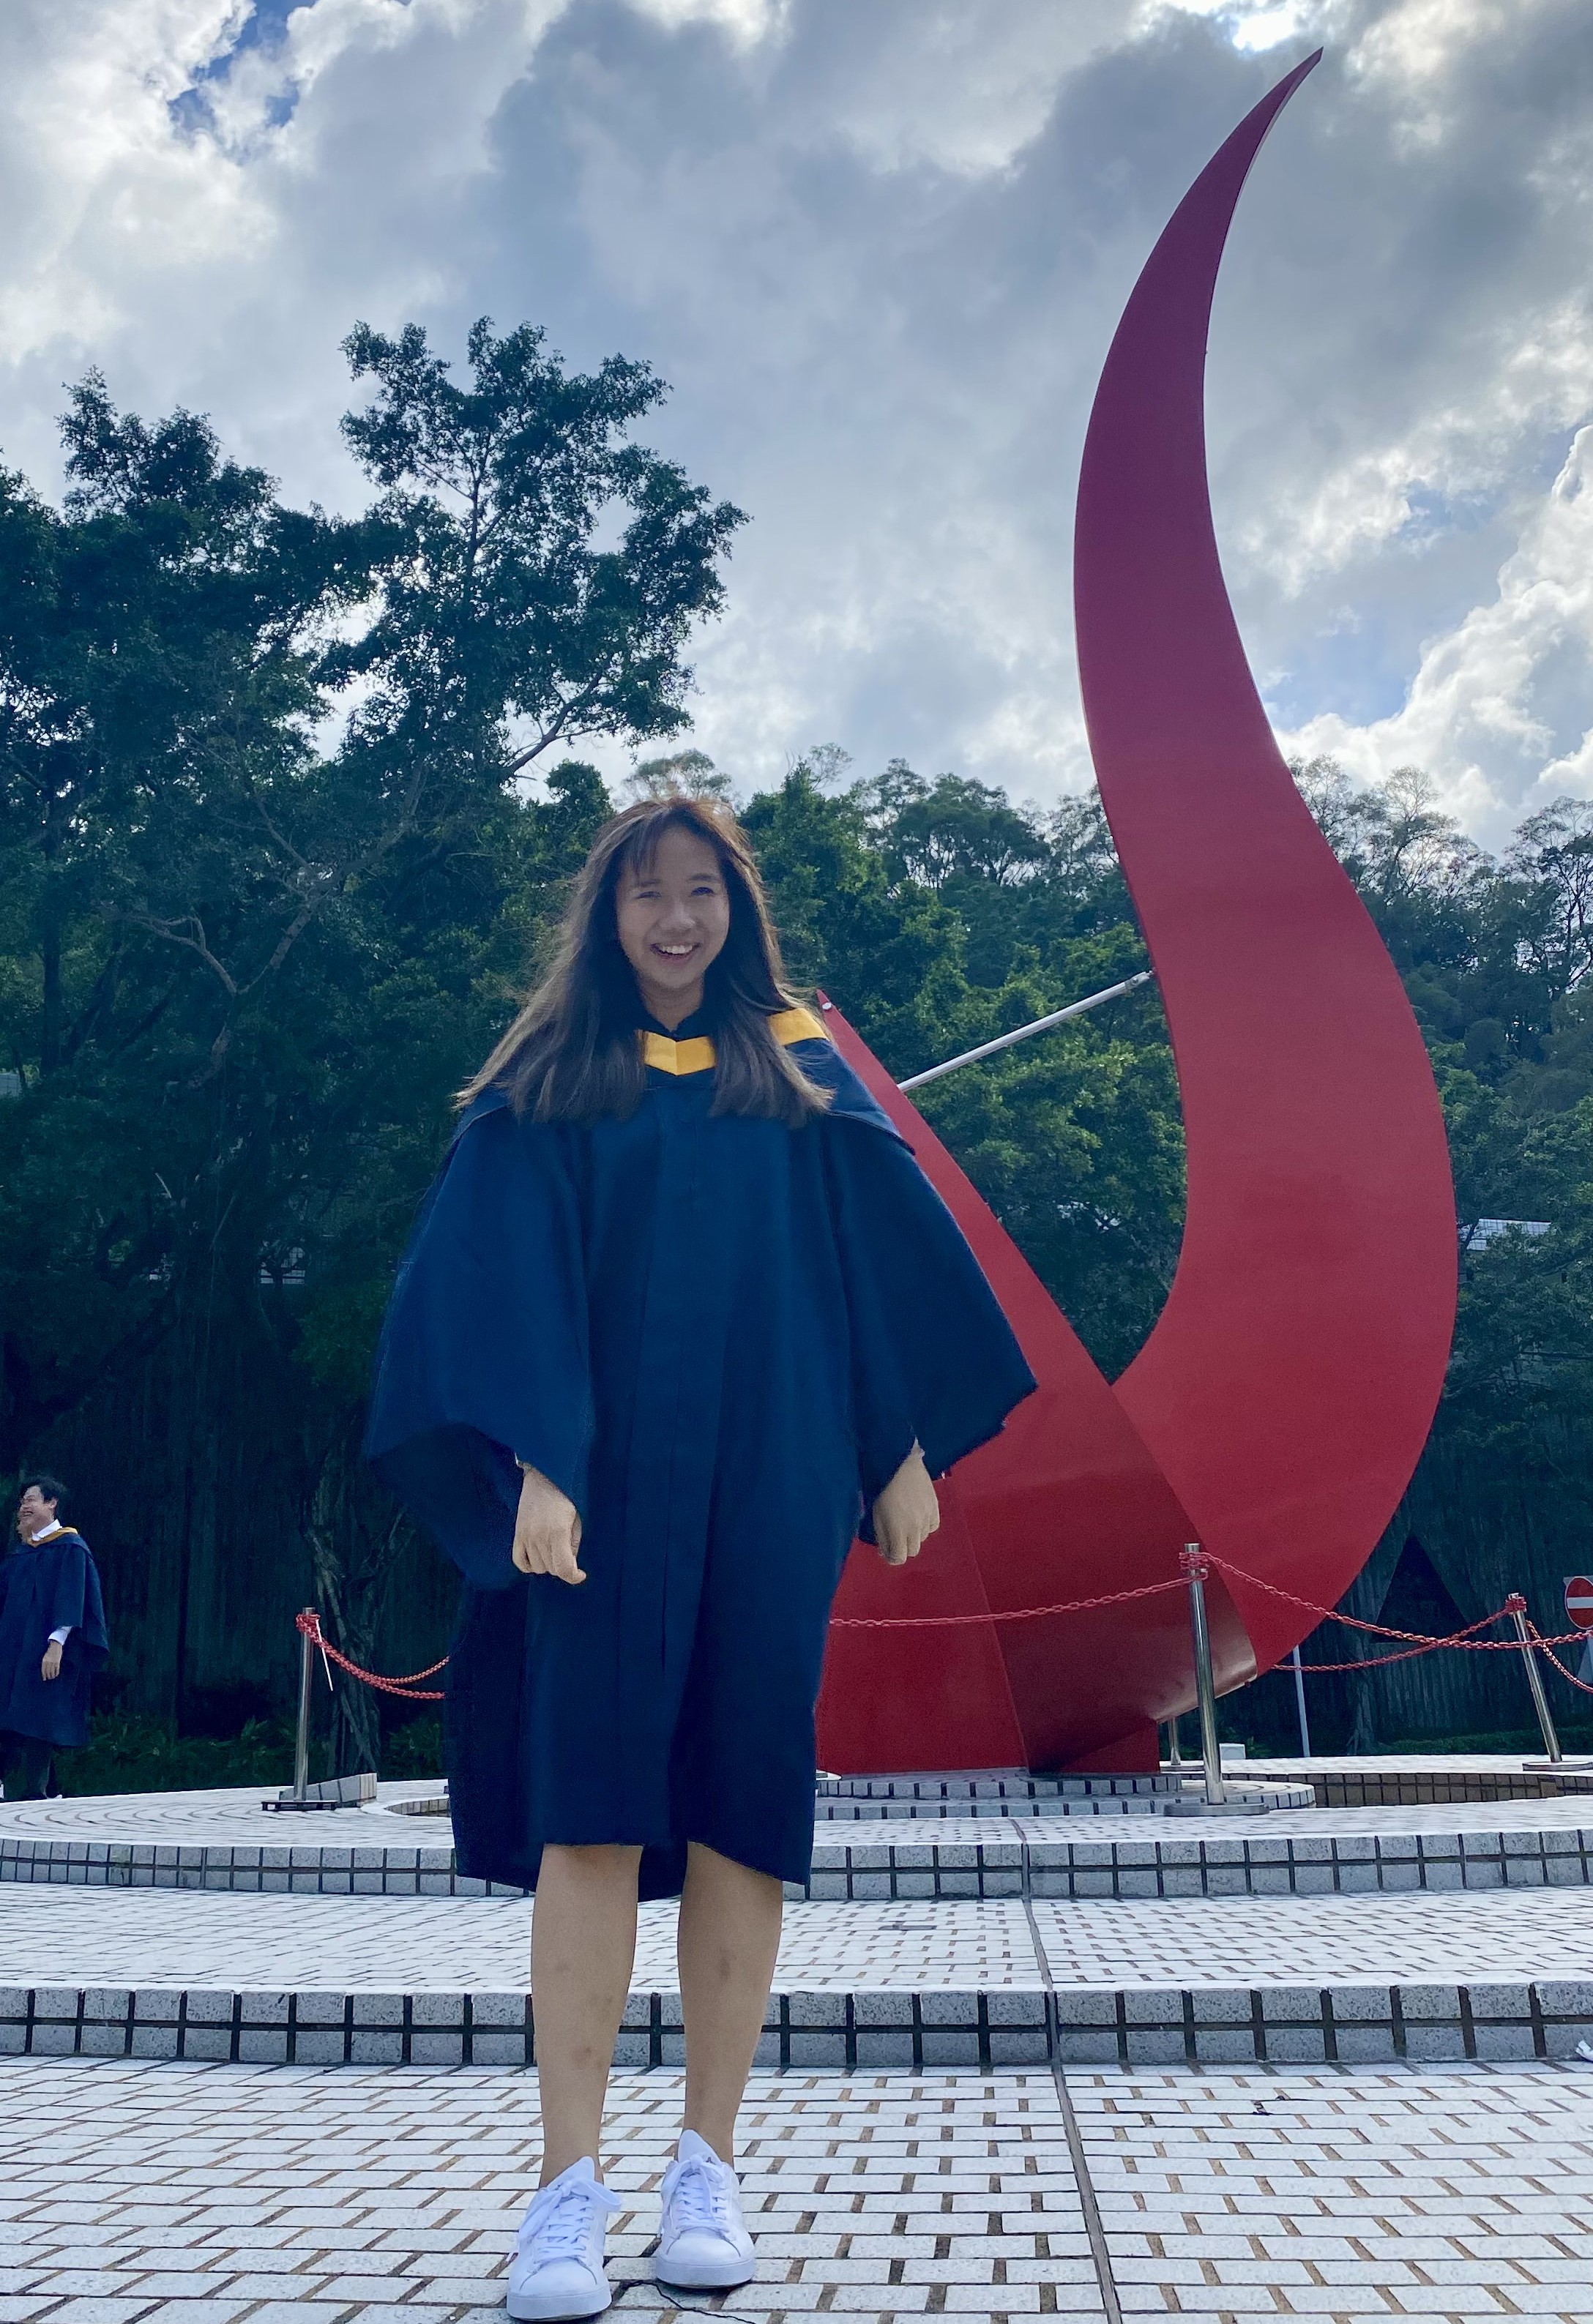 2022 Civil Engineering major, Janice graduated with fully seven job offers.